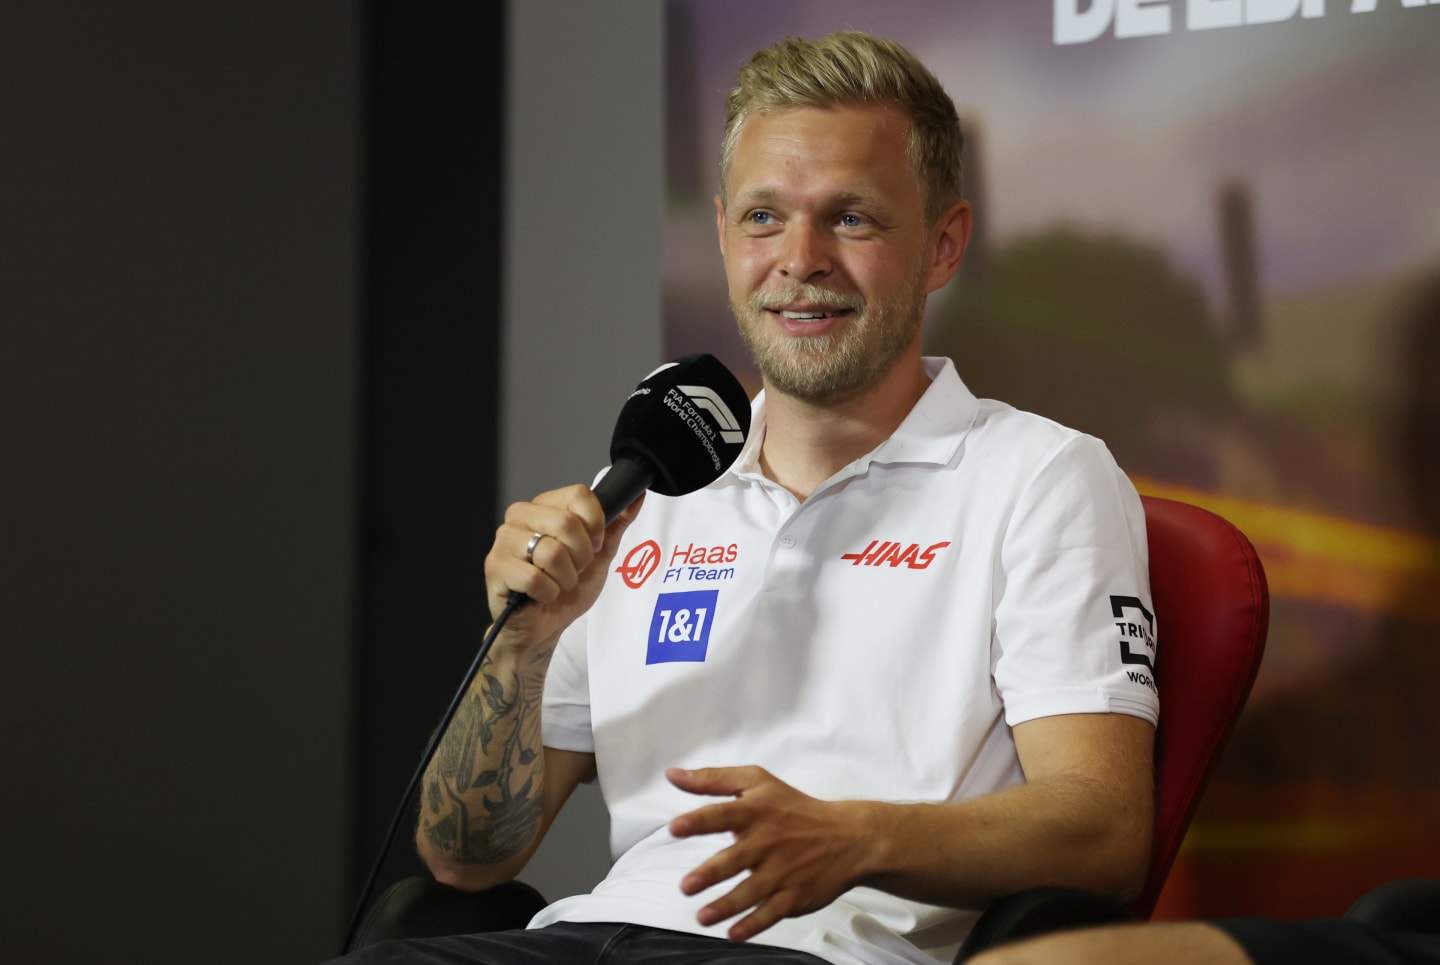 BARCELONA, SPAIN - MAY 20: Kevin Magnussen of Denmark and Haas F1 talks in the Drivers Press Conference prior to practice ahead of the F1 Grand Prix of Spain at Circuit de Barcelona-Catalunya on May 20, 2022 in Barcelona, Spain. (Photo by Bryn Lennon/Getty Images)